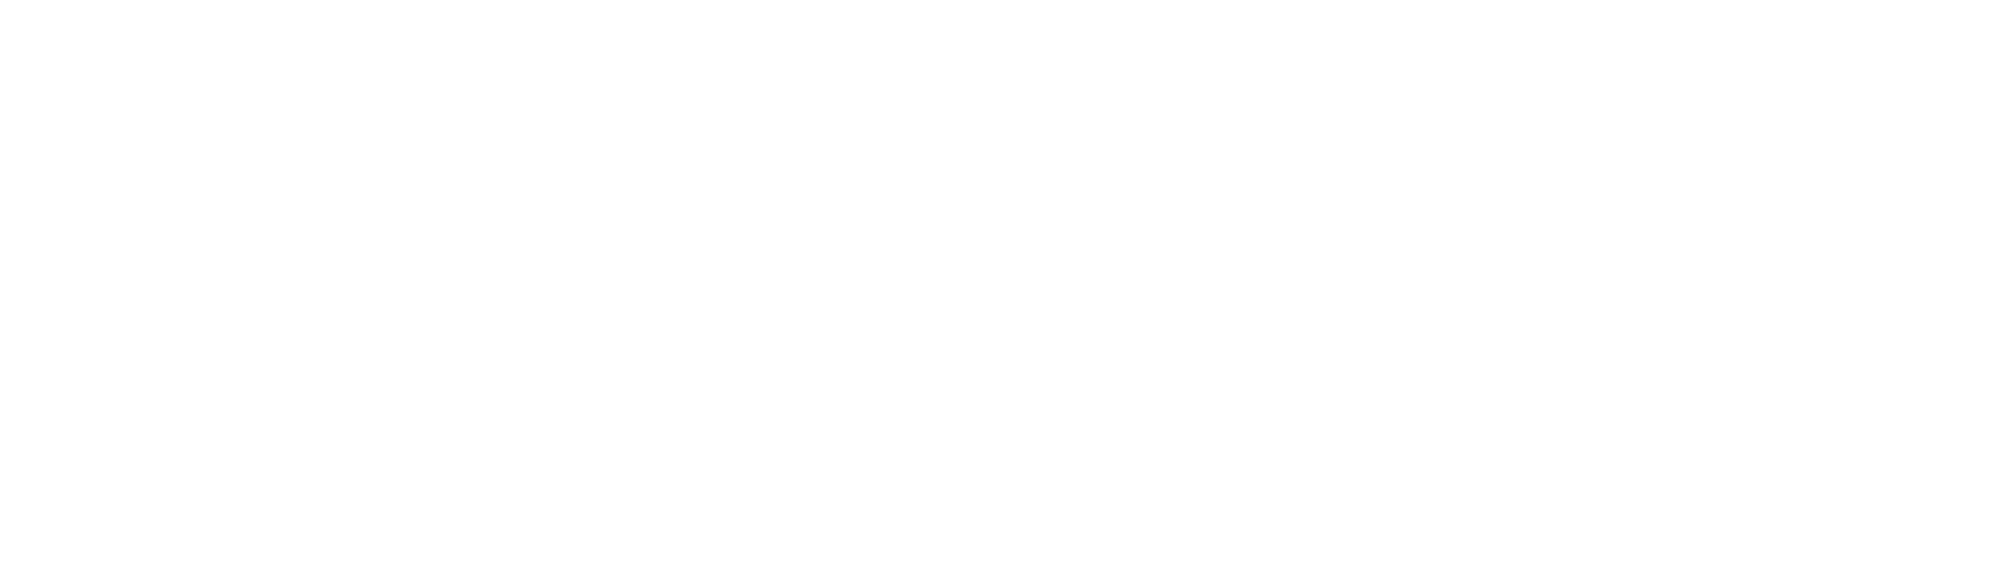 Nicky Downes Crime Author